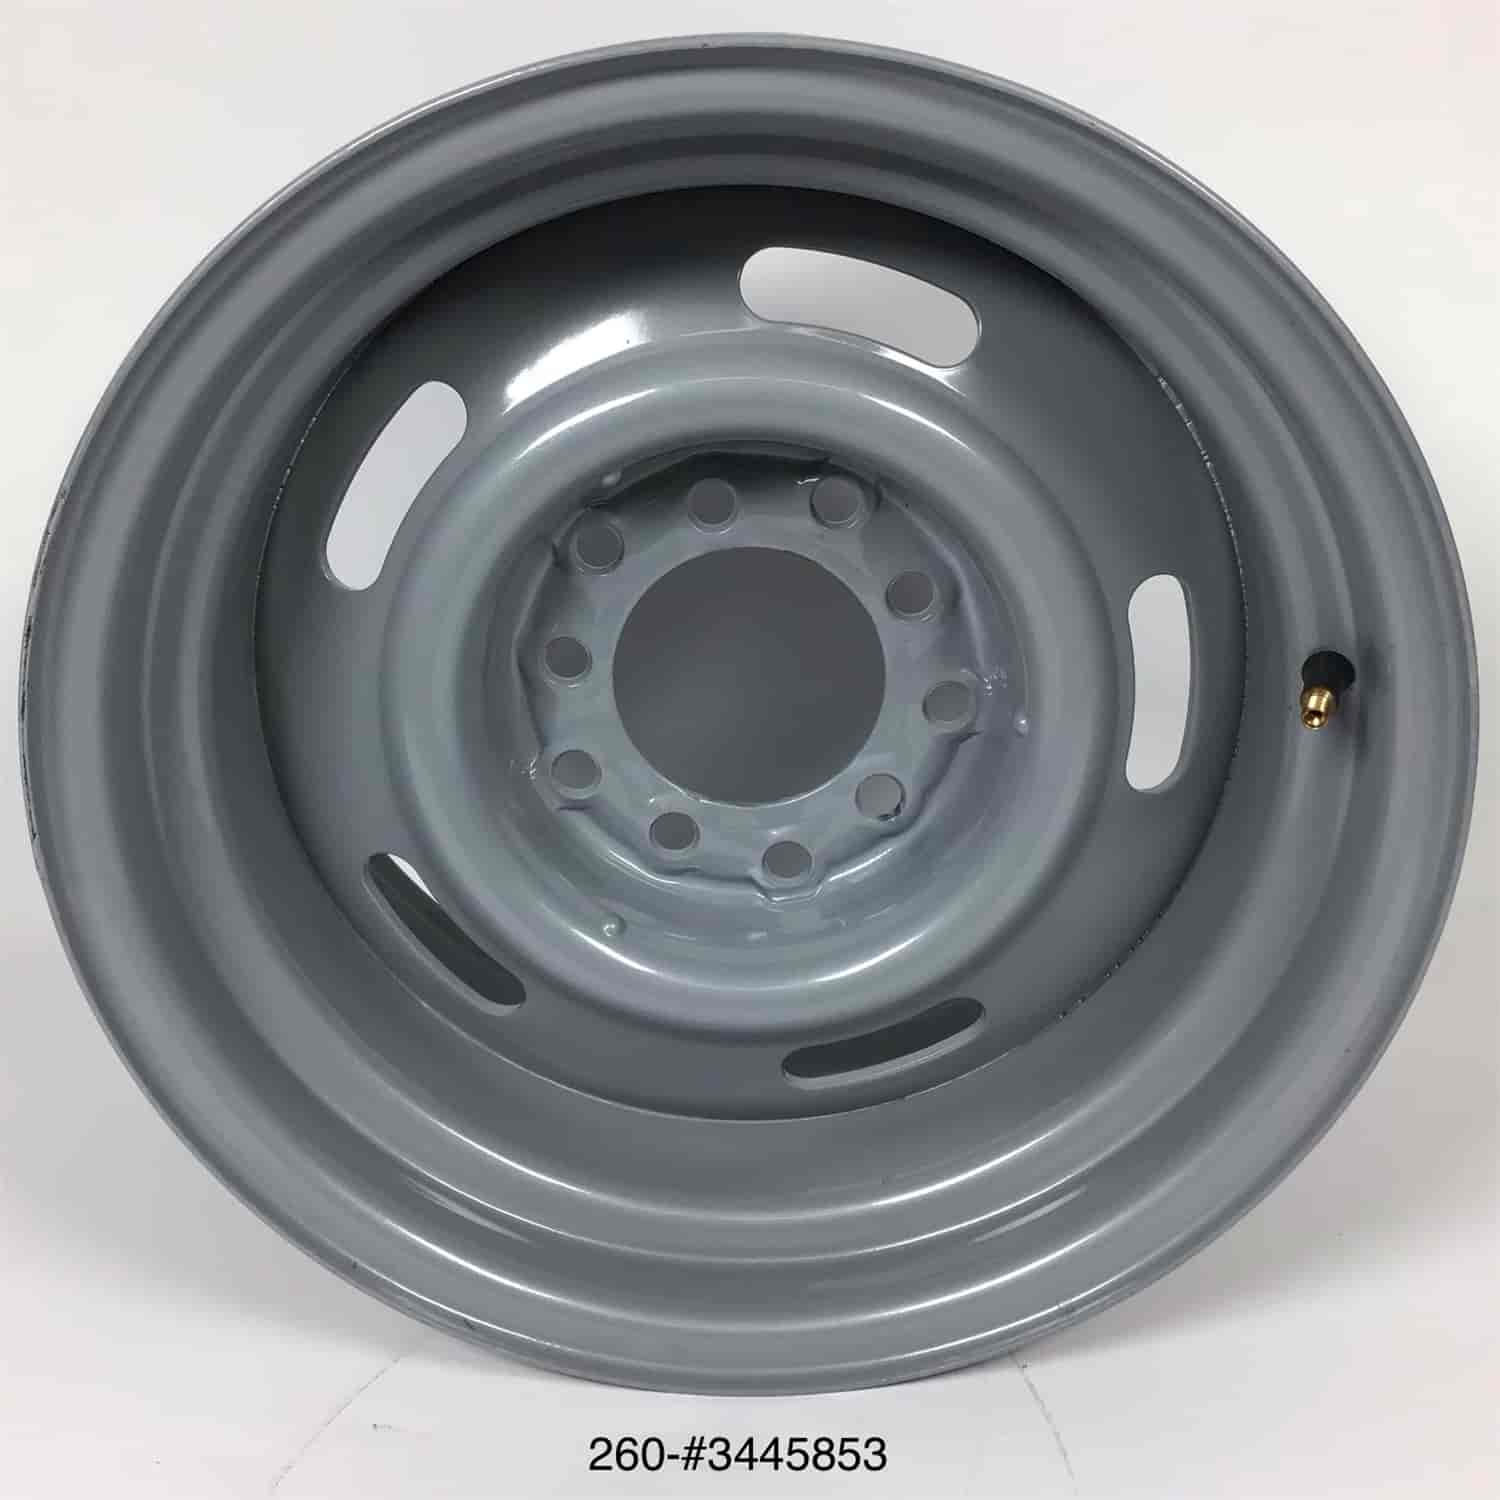 *BLEMISHED* 344 Series Rally Wheel Size: 15" x 8"